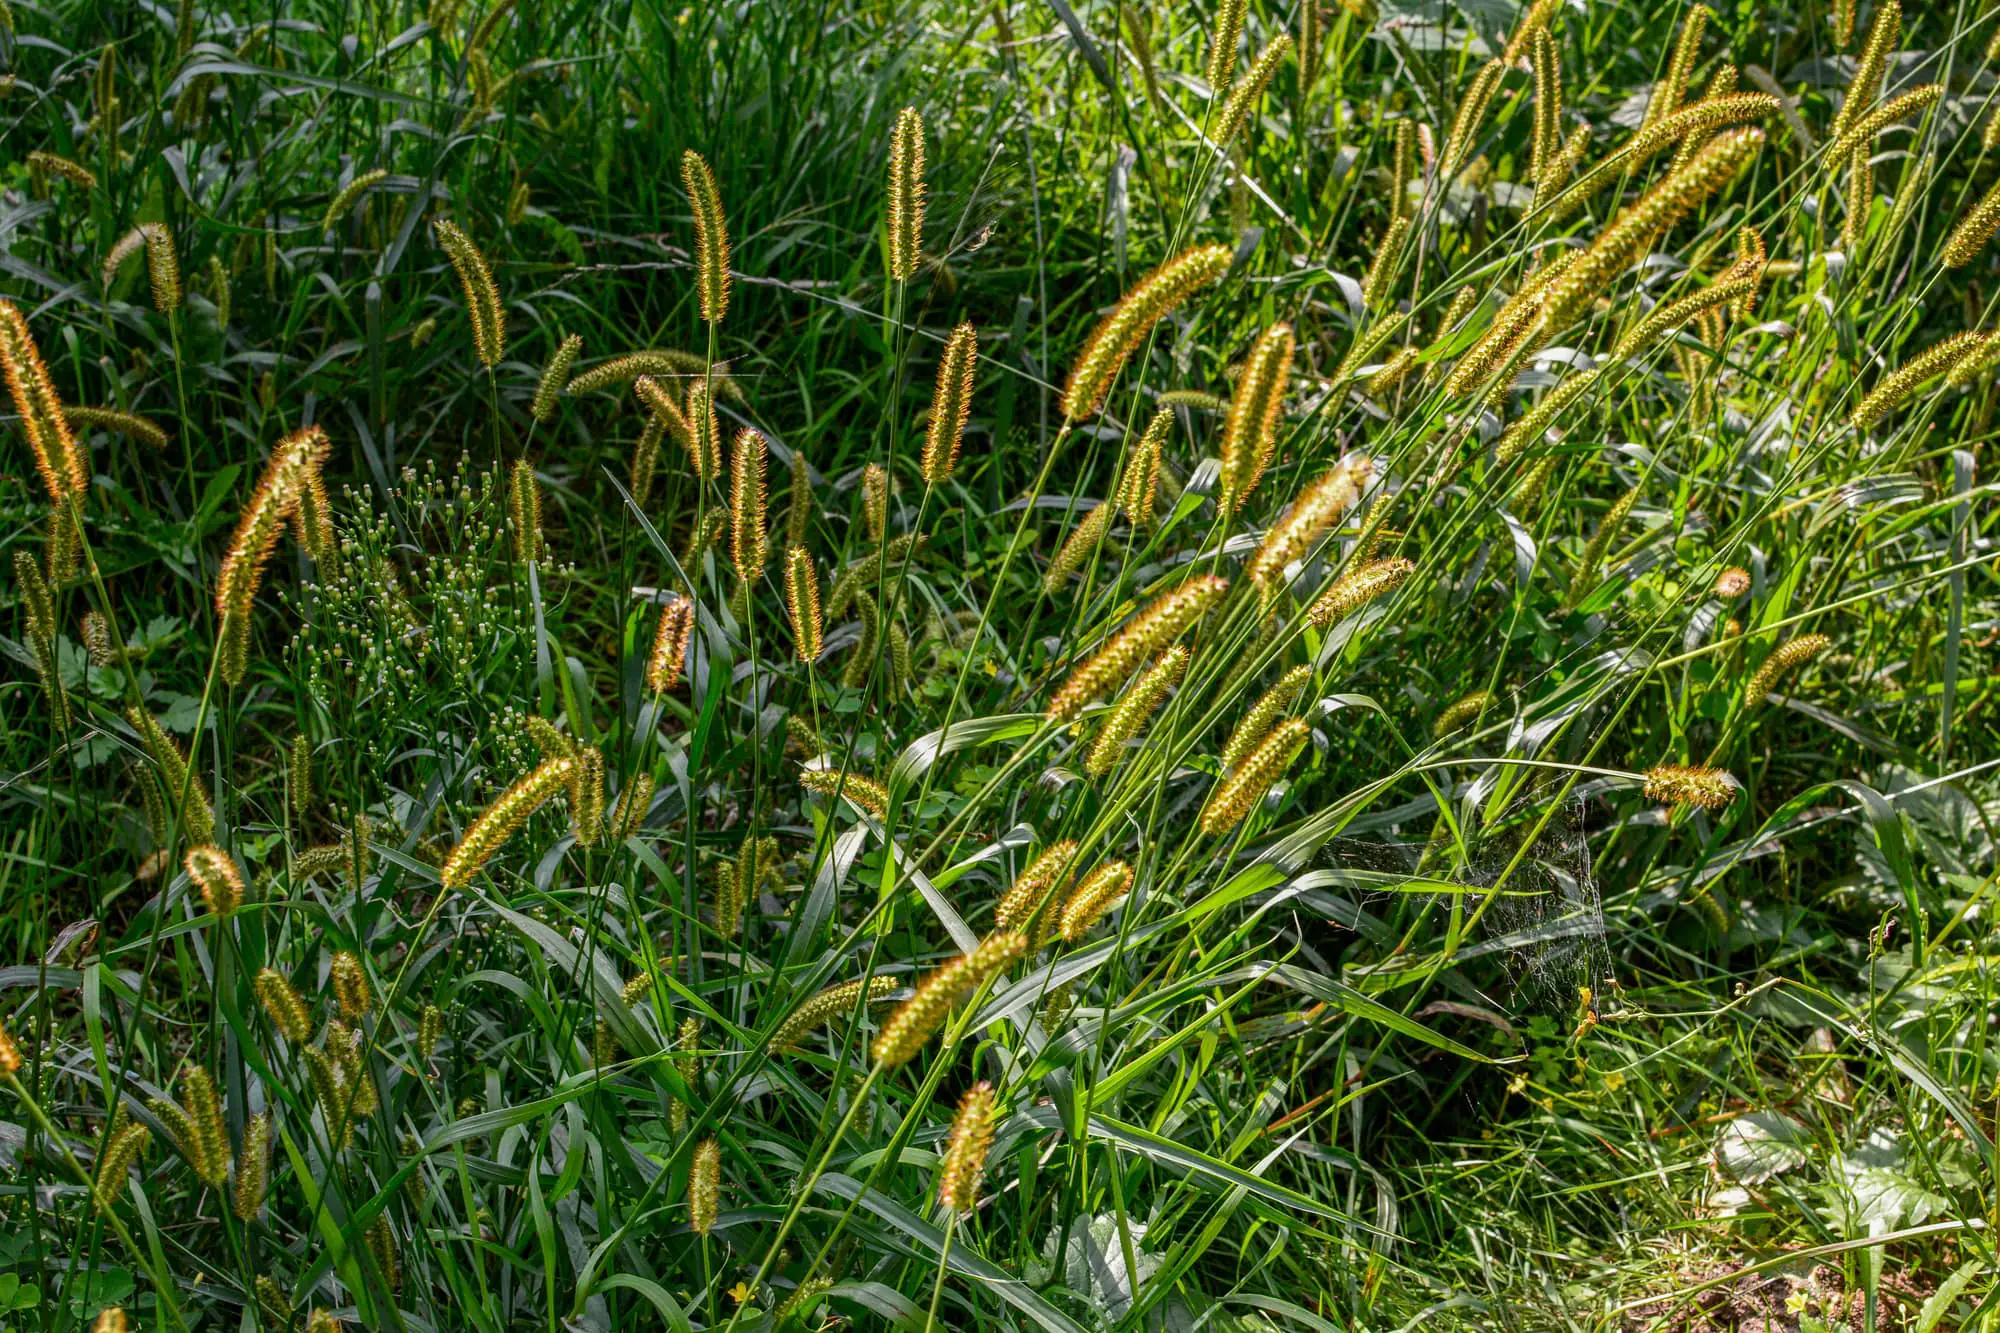 Foxtail in the grass